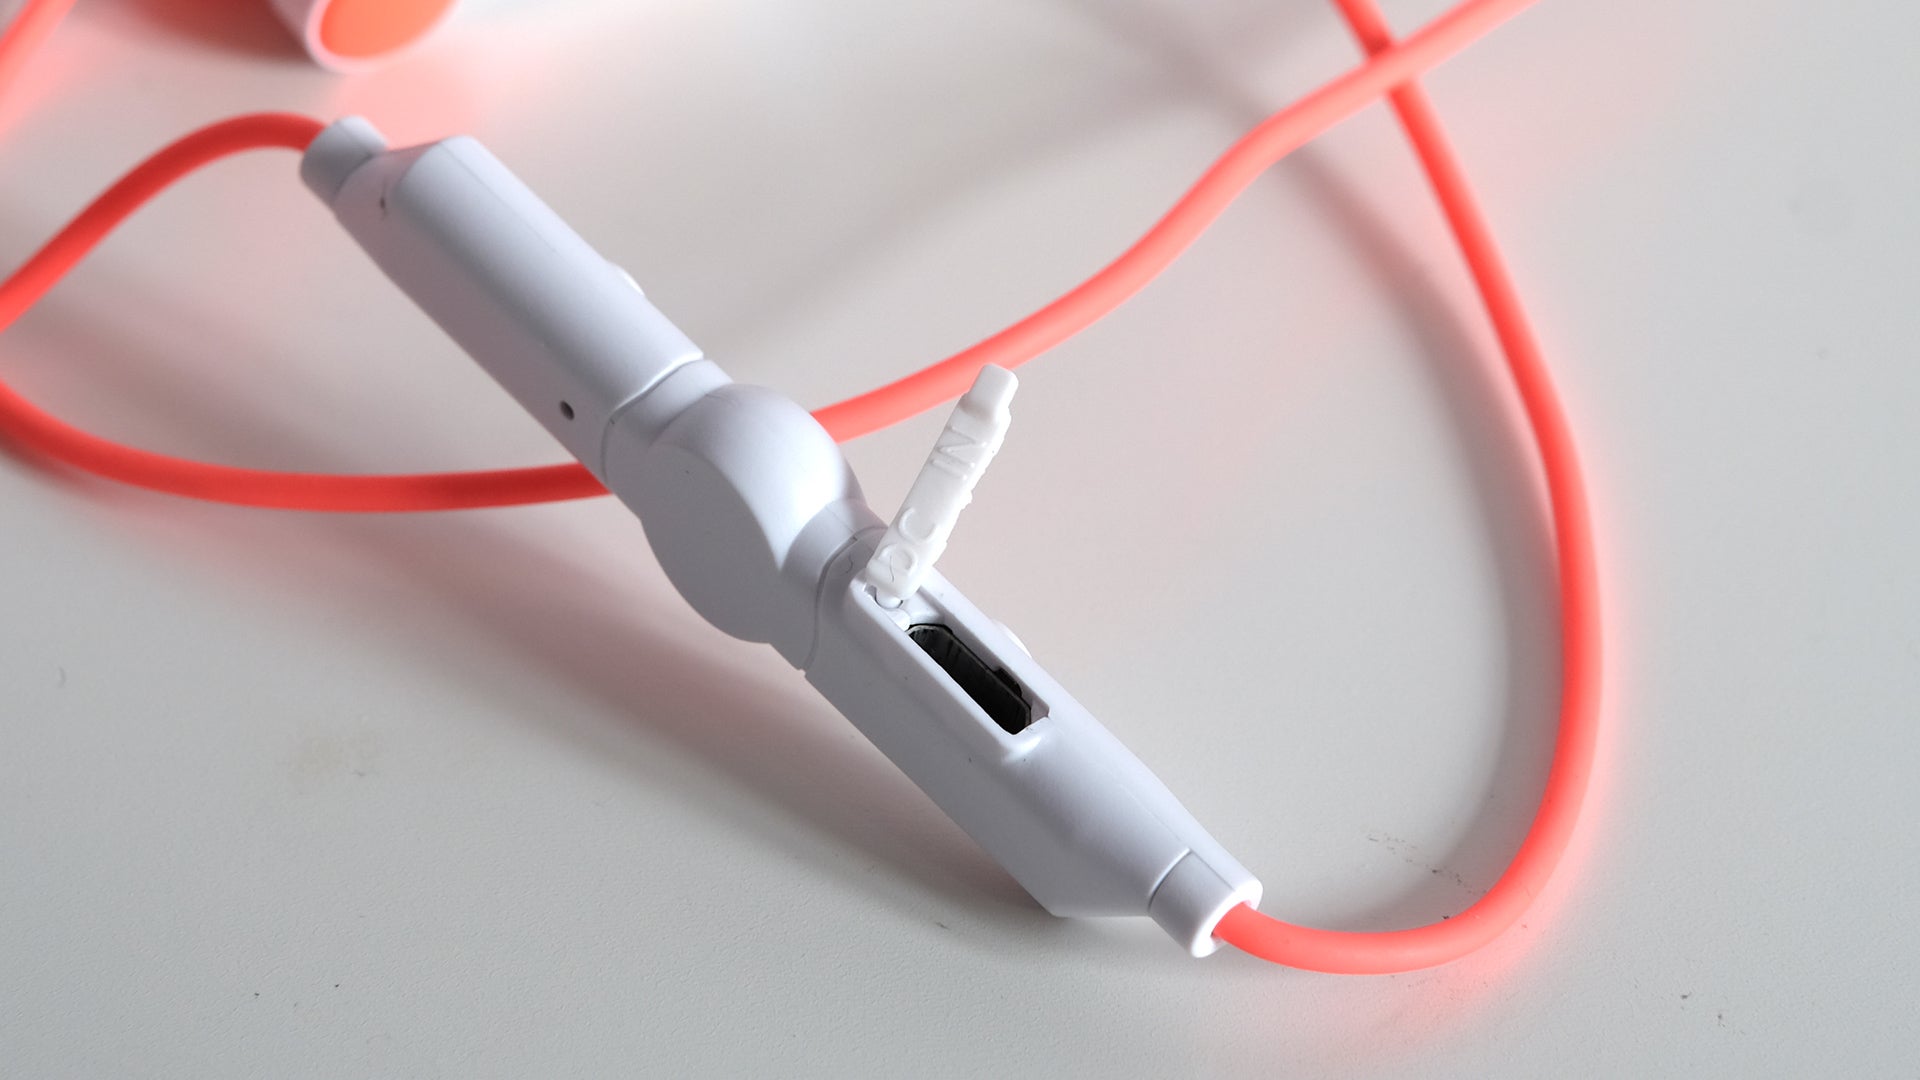 Koss Fitbuds BT190i earphones with orange cord on white background.